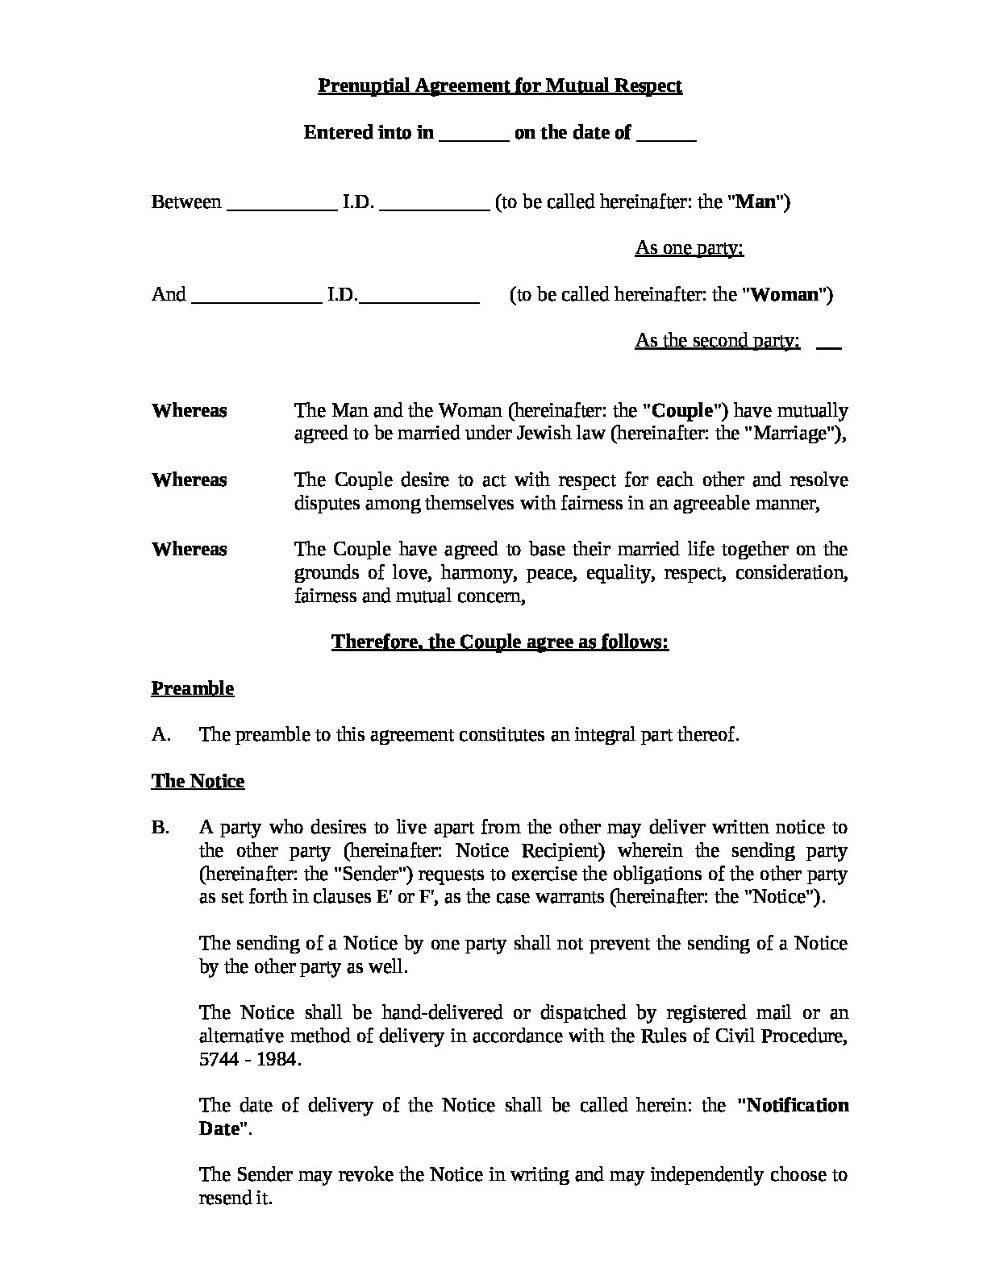 Prenuptial Agreement for Mutual Respect Template